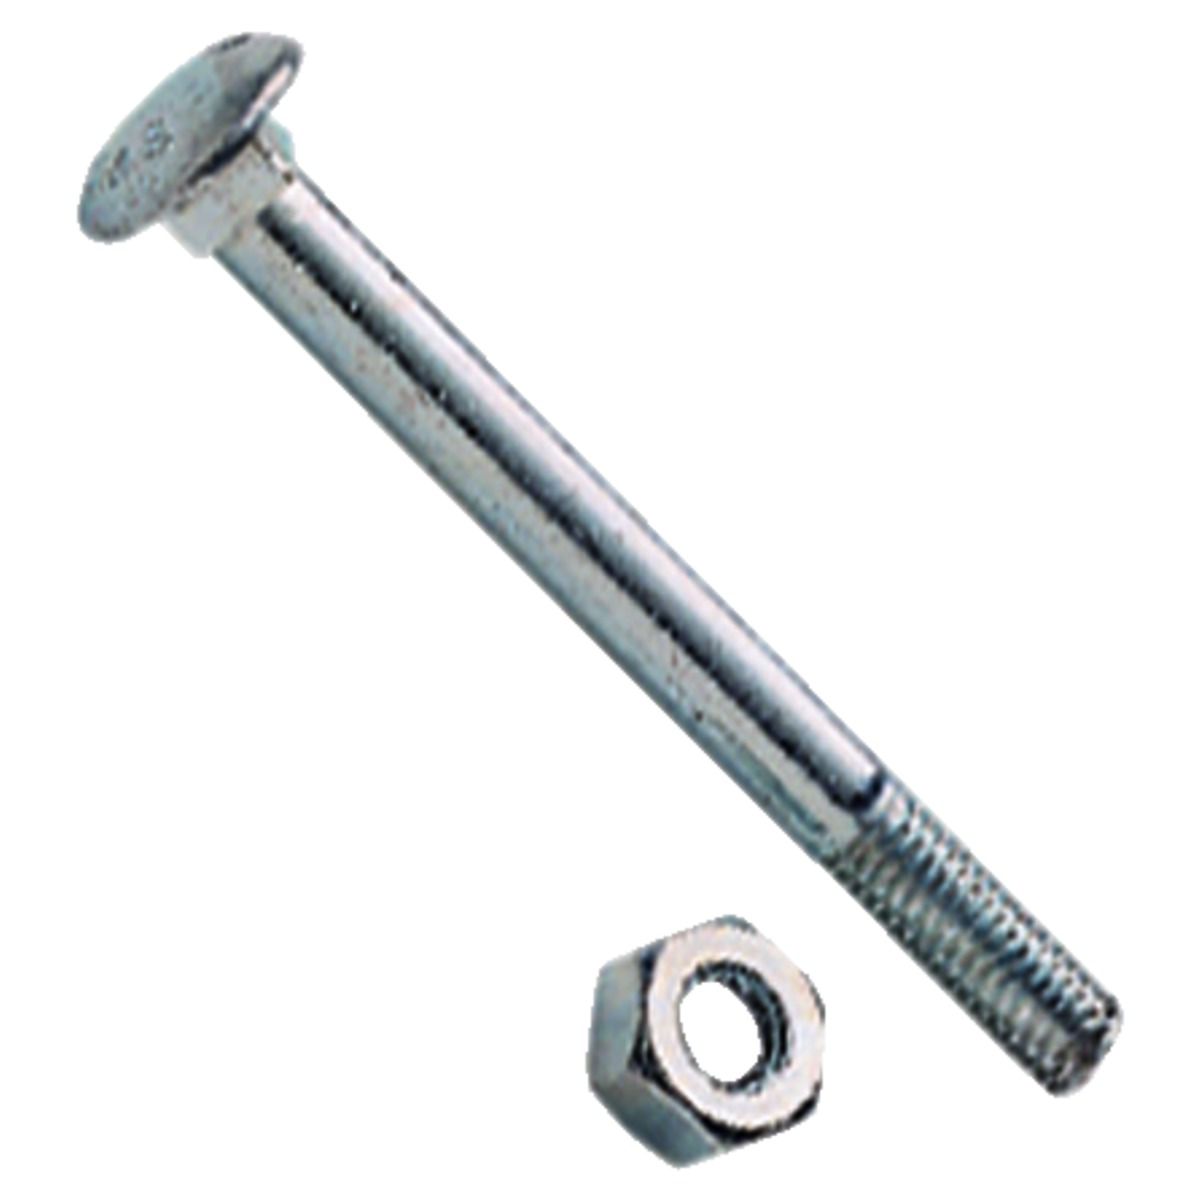 Image of Wickes Carriage Bolt Nut & Washer - M10 x 130mm Pack of 4